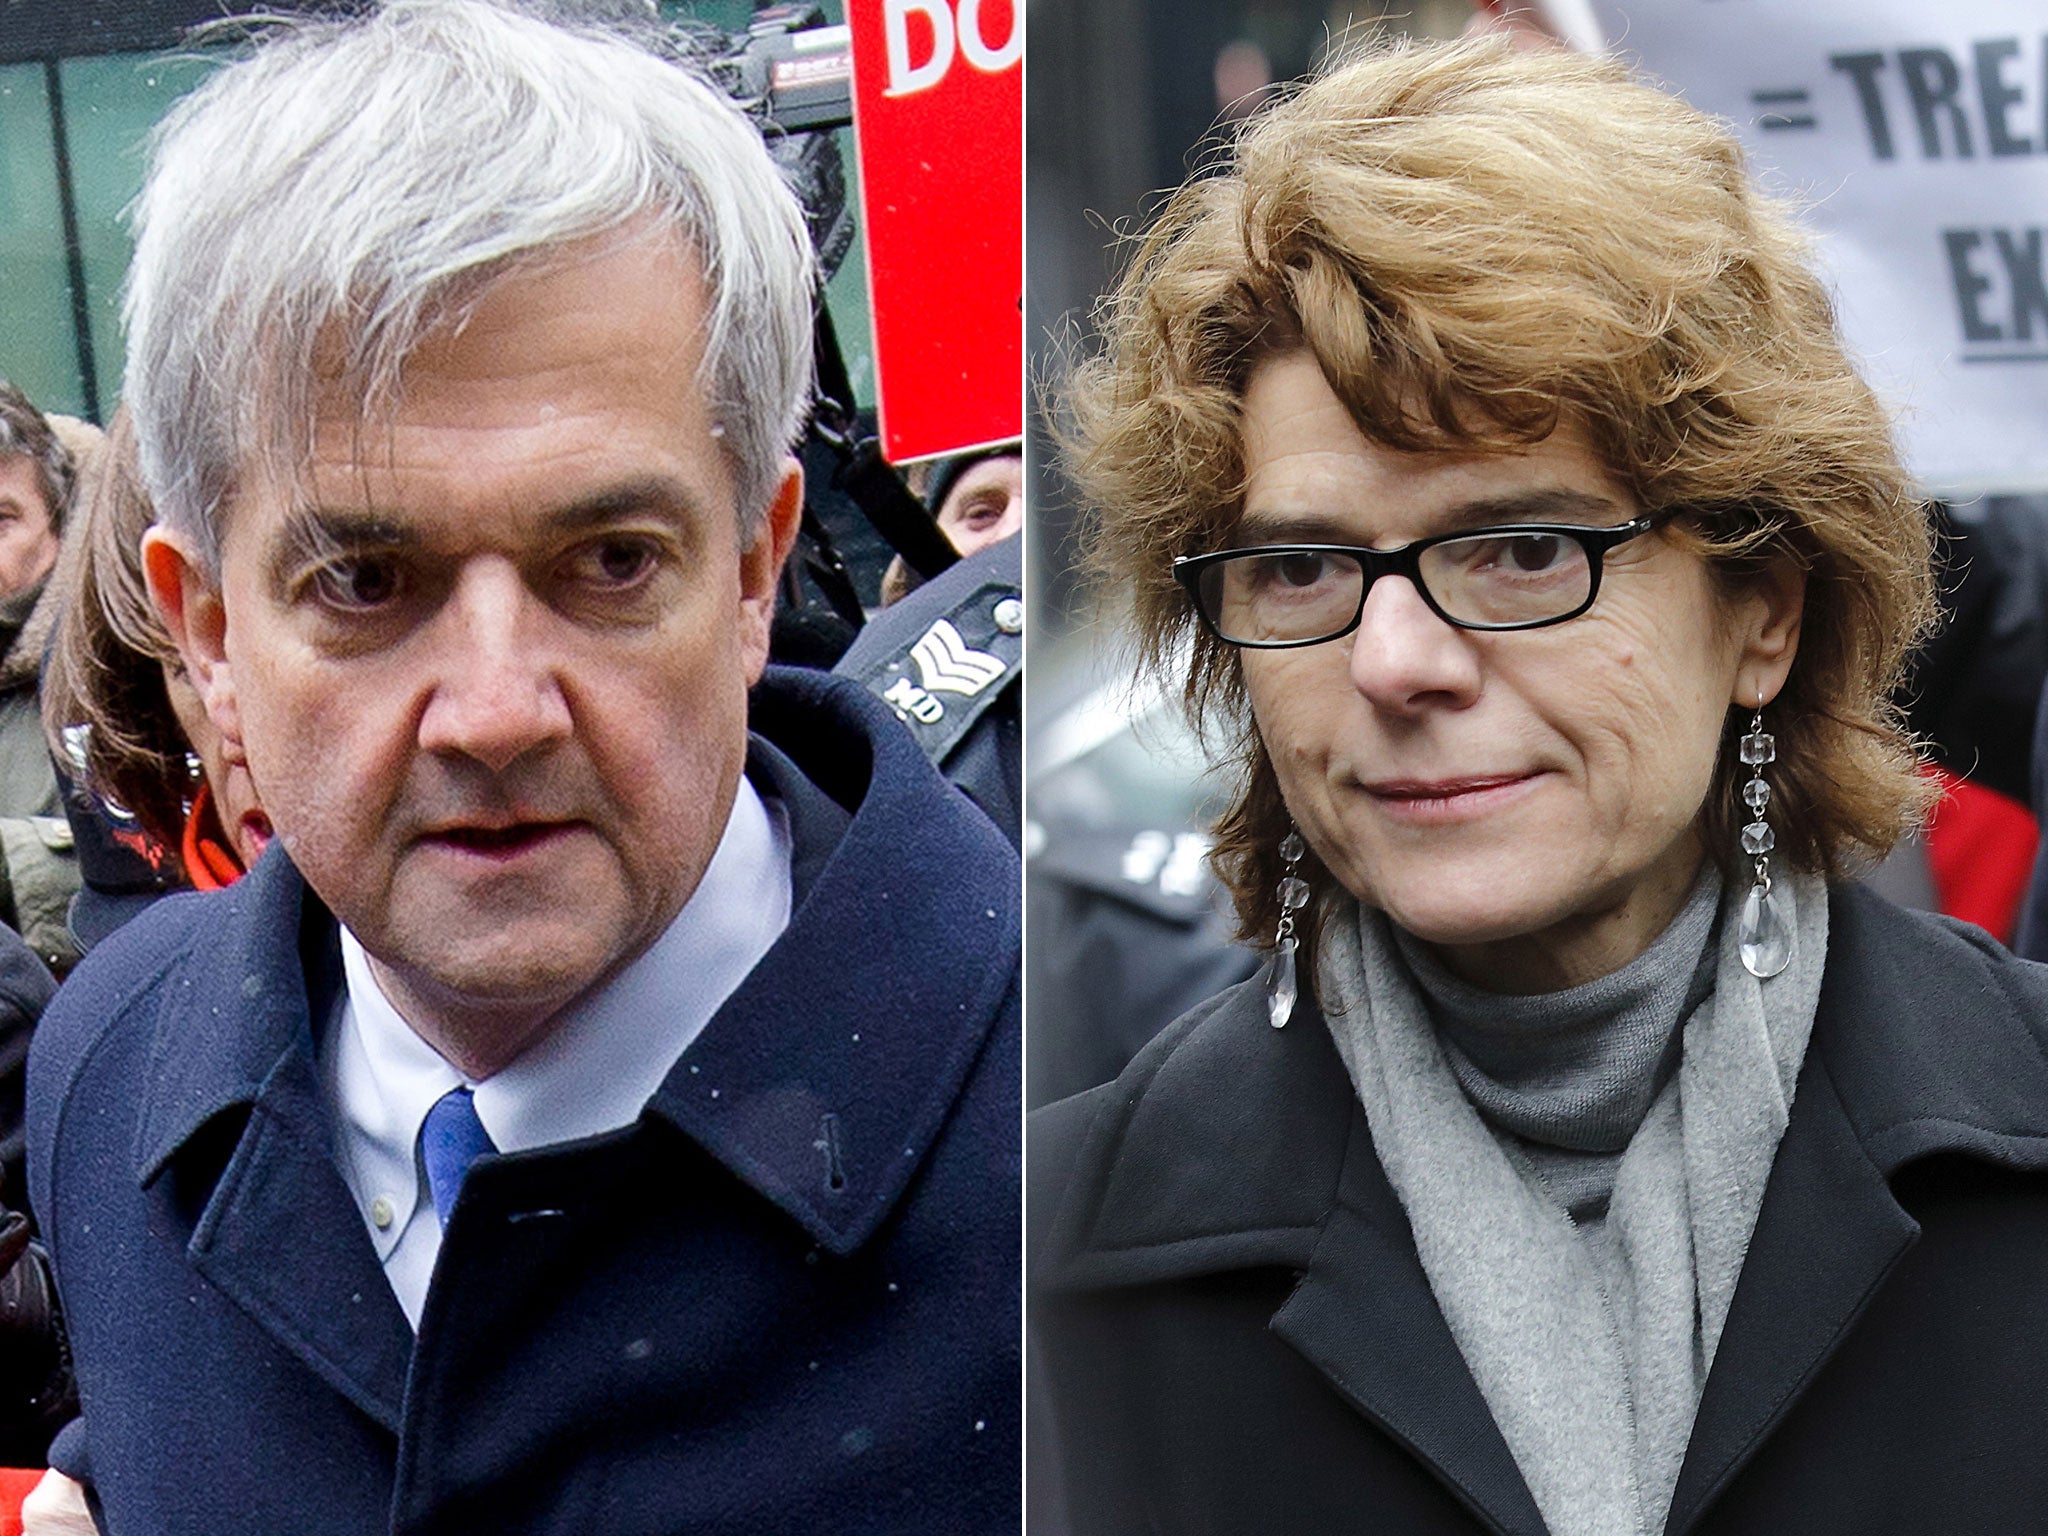 Chris Huhne was punched by Vicky Price after she found out about his affair with an aide